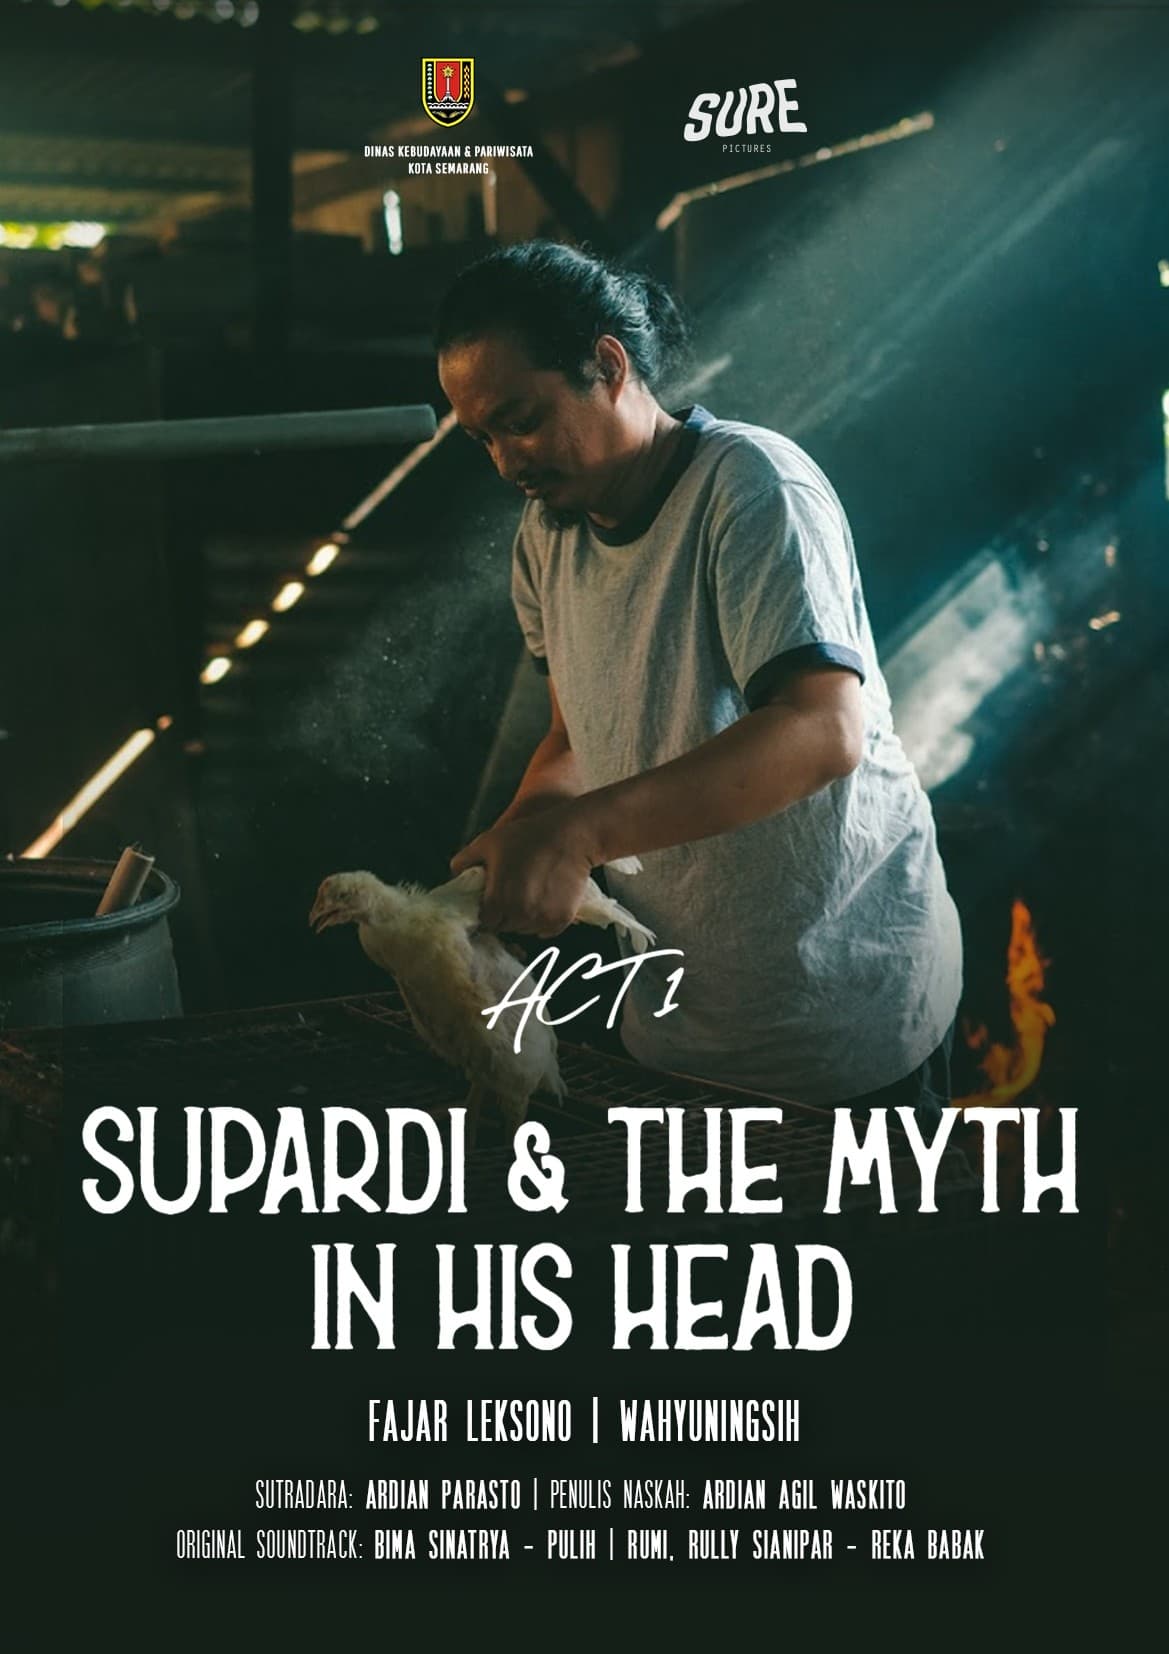 Supardi & The Myth in His Head